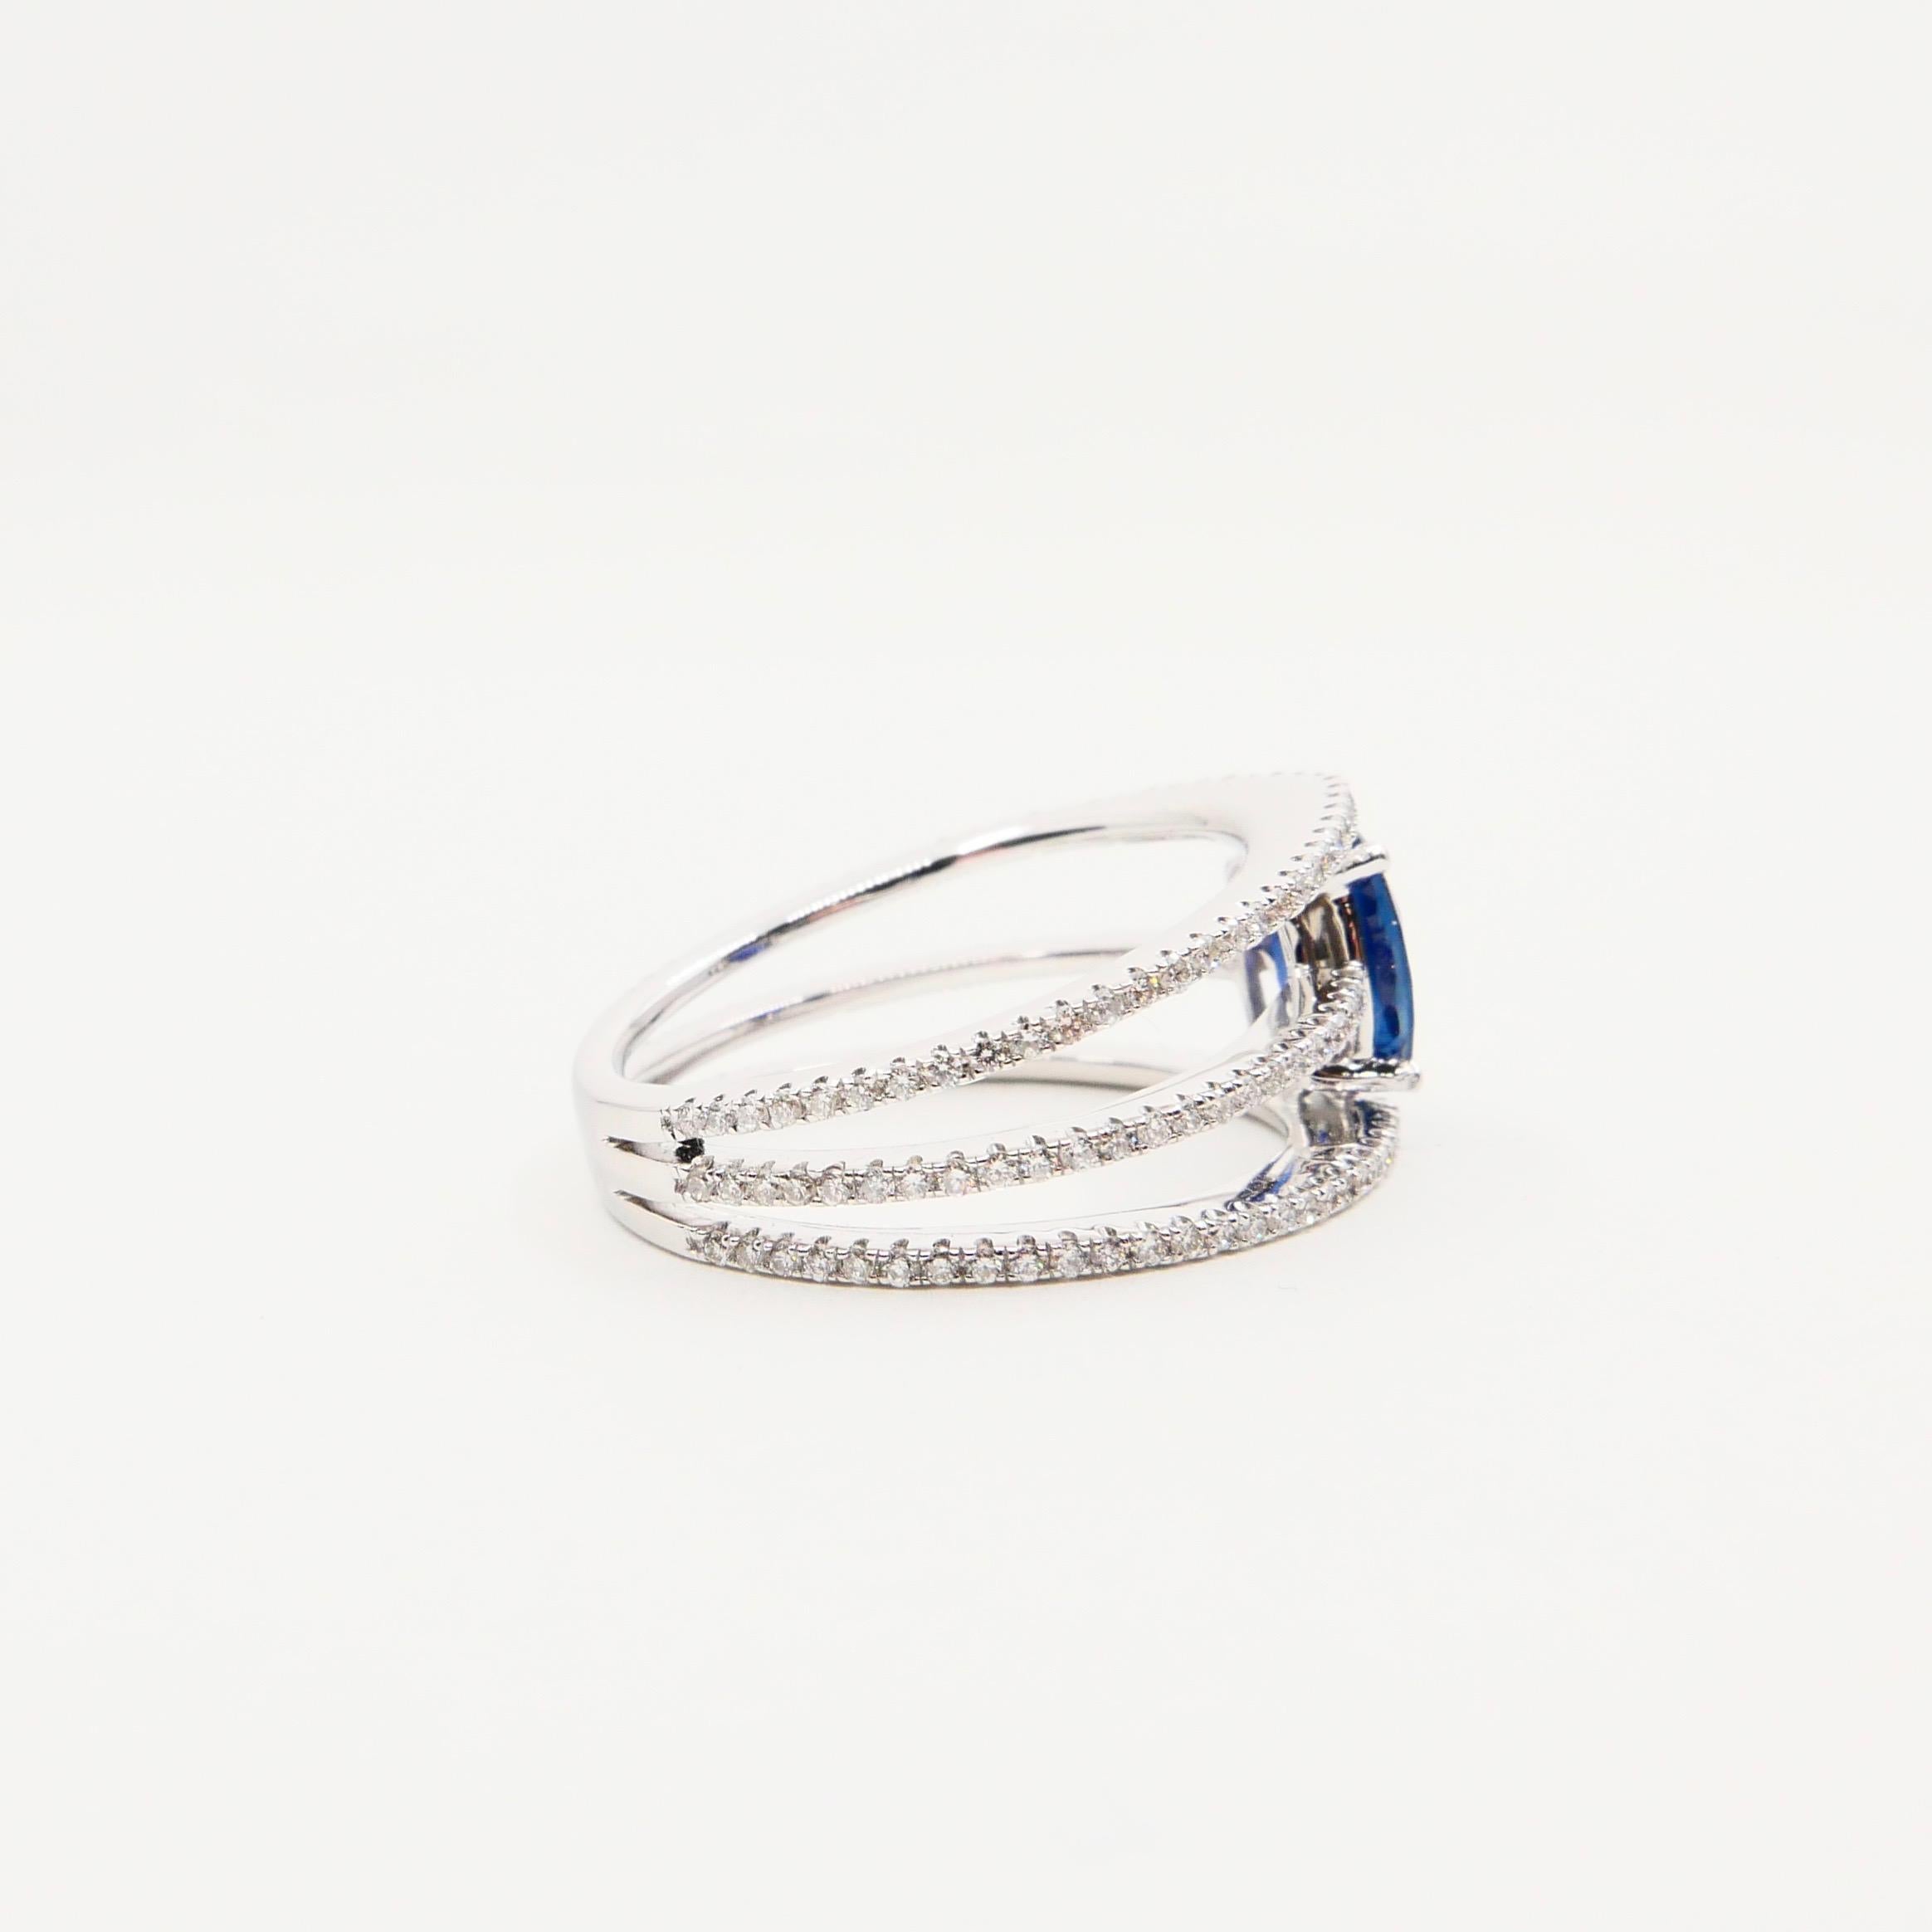 Blue Sapphire and Diamond Cocktail Ring, 3 Rows Design, 18 Karat White Gold For Sale 8